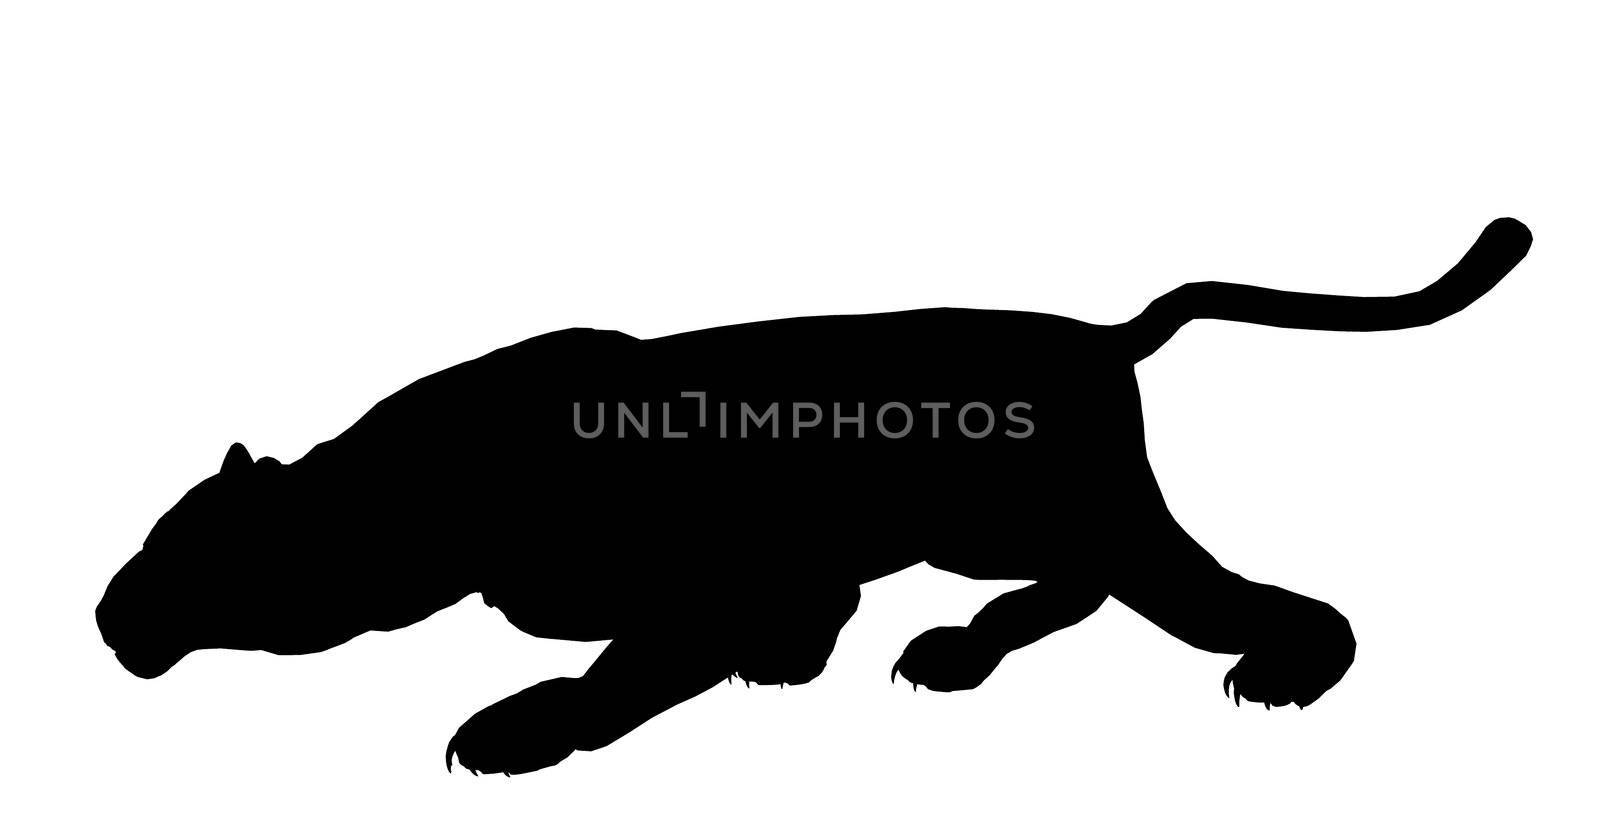 Black panther art illustration silhouette on a white background